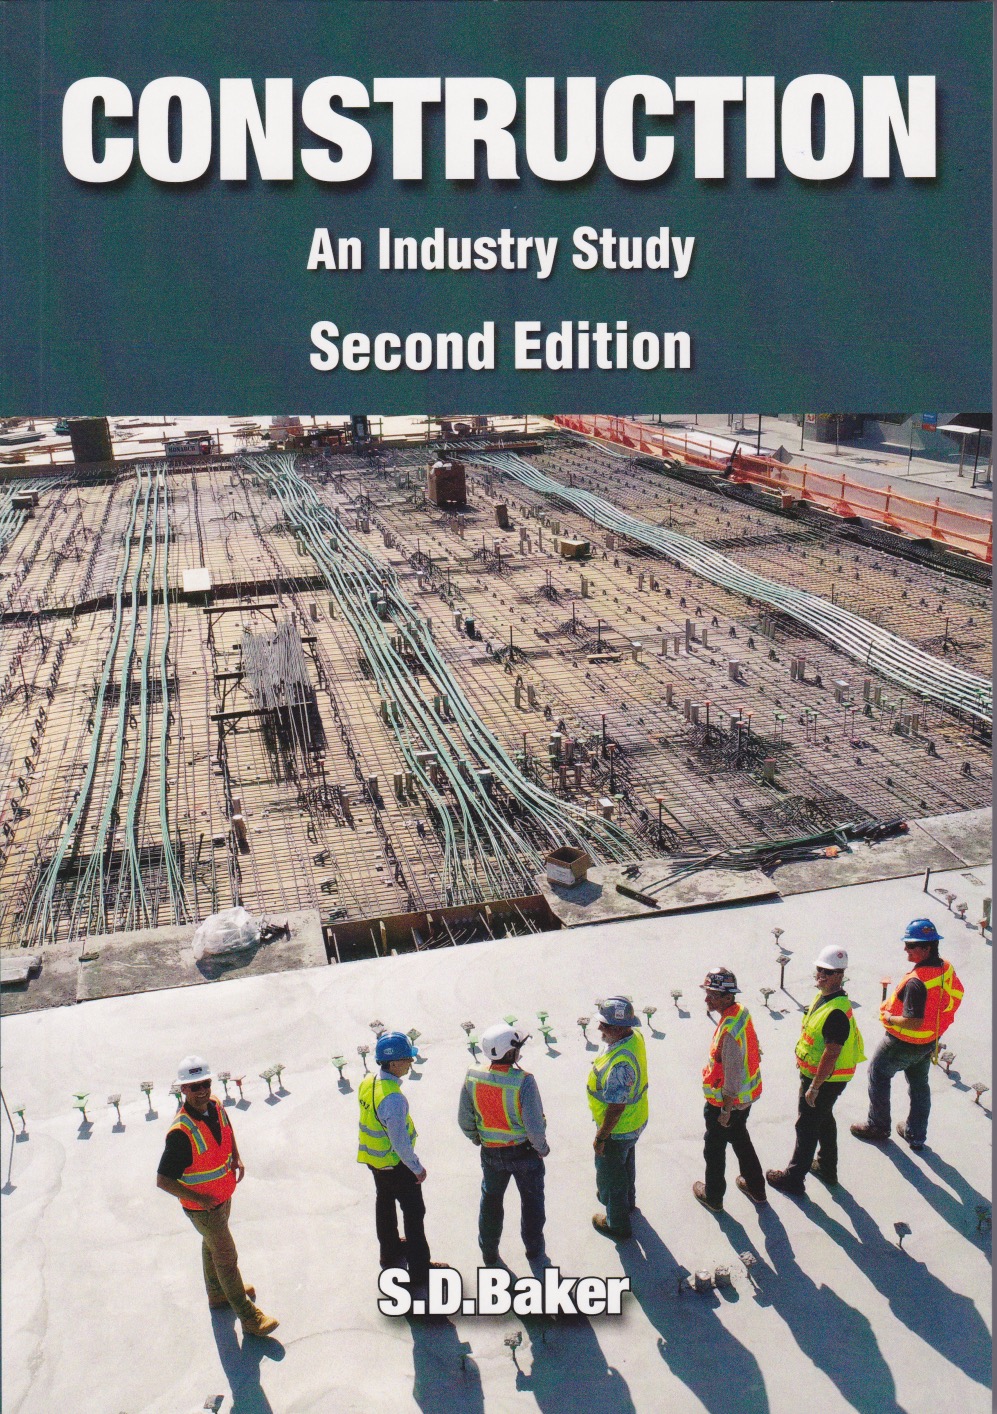 research topics in construction industry